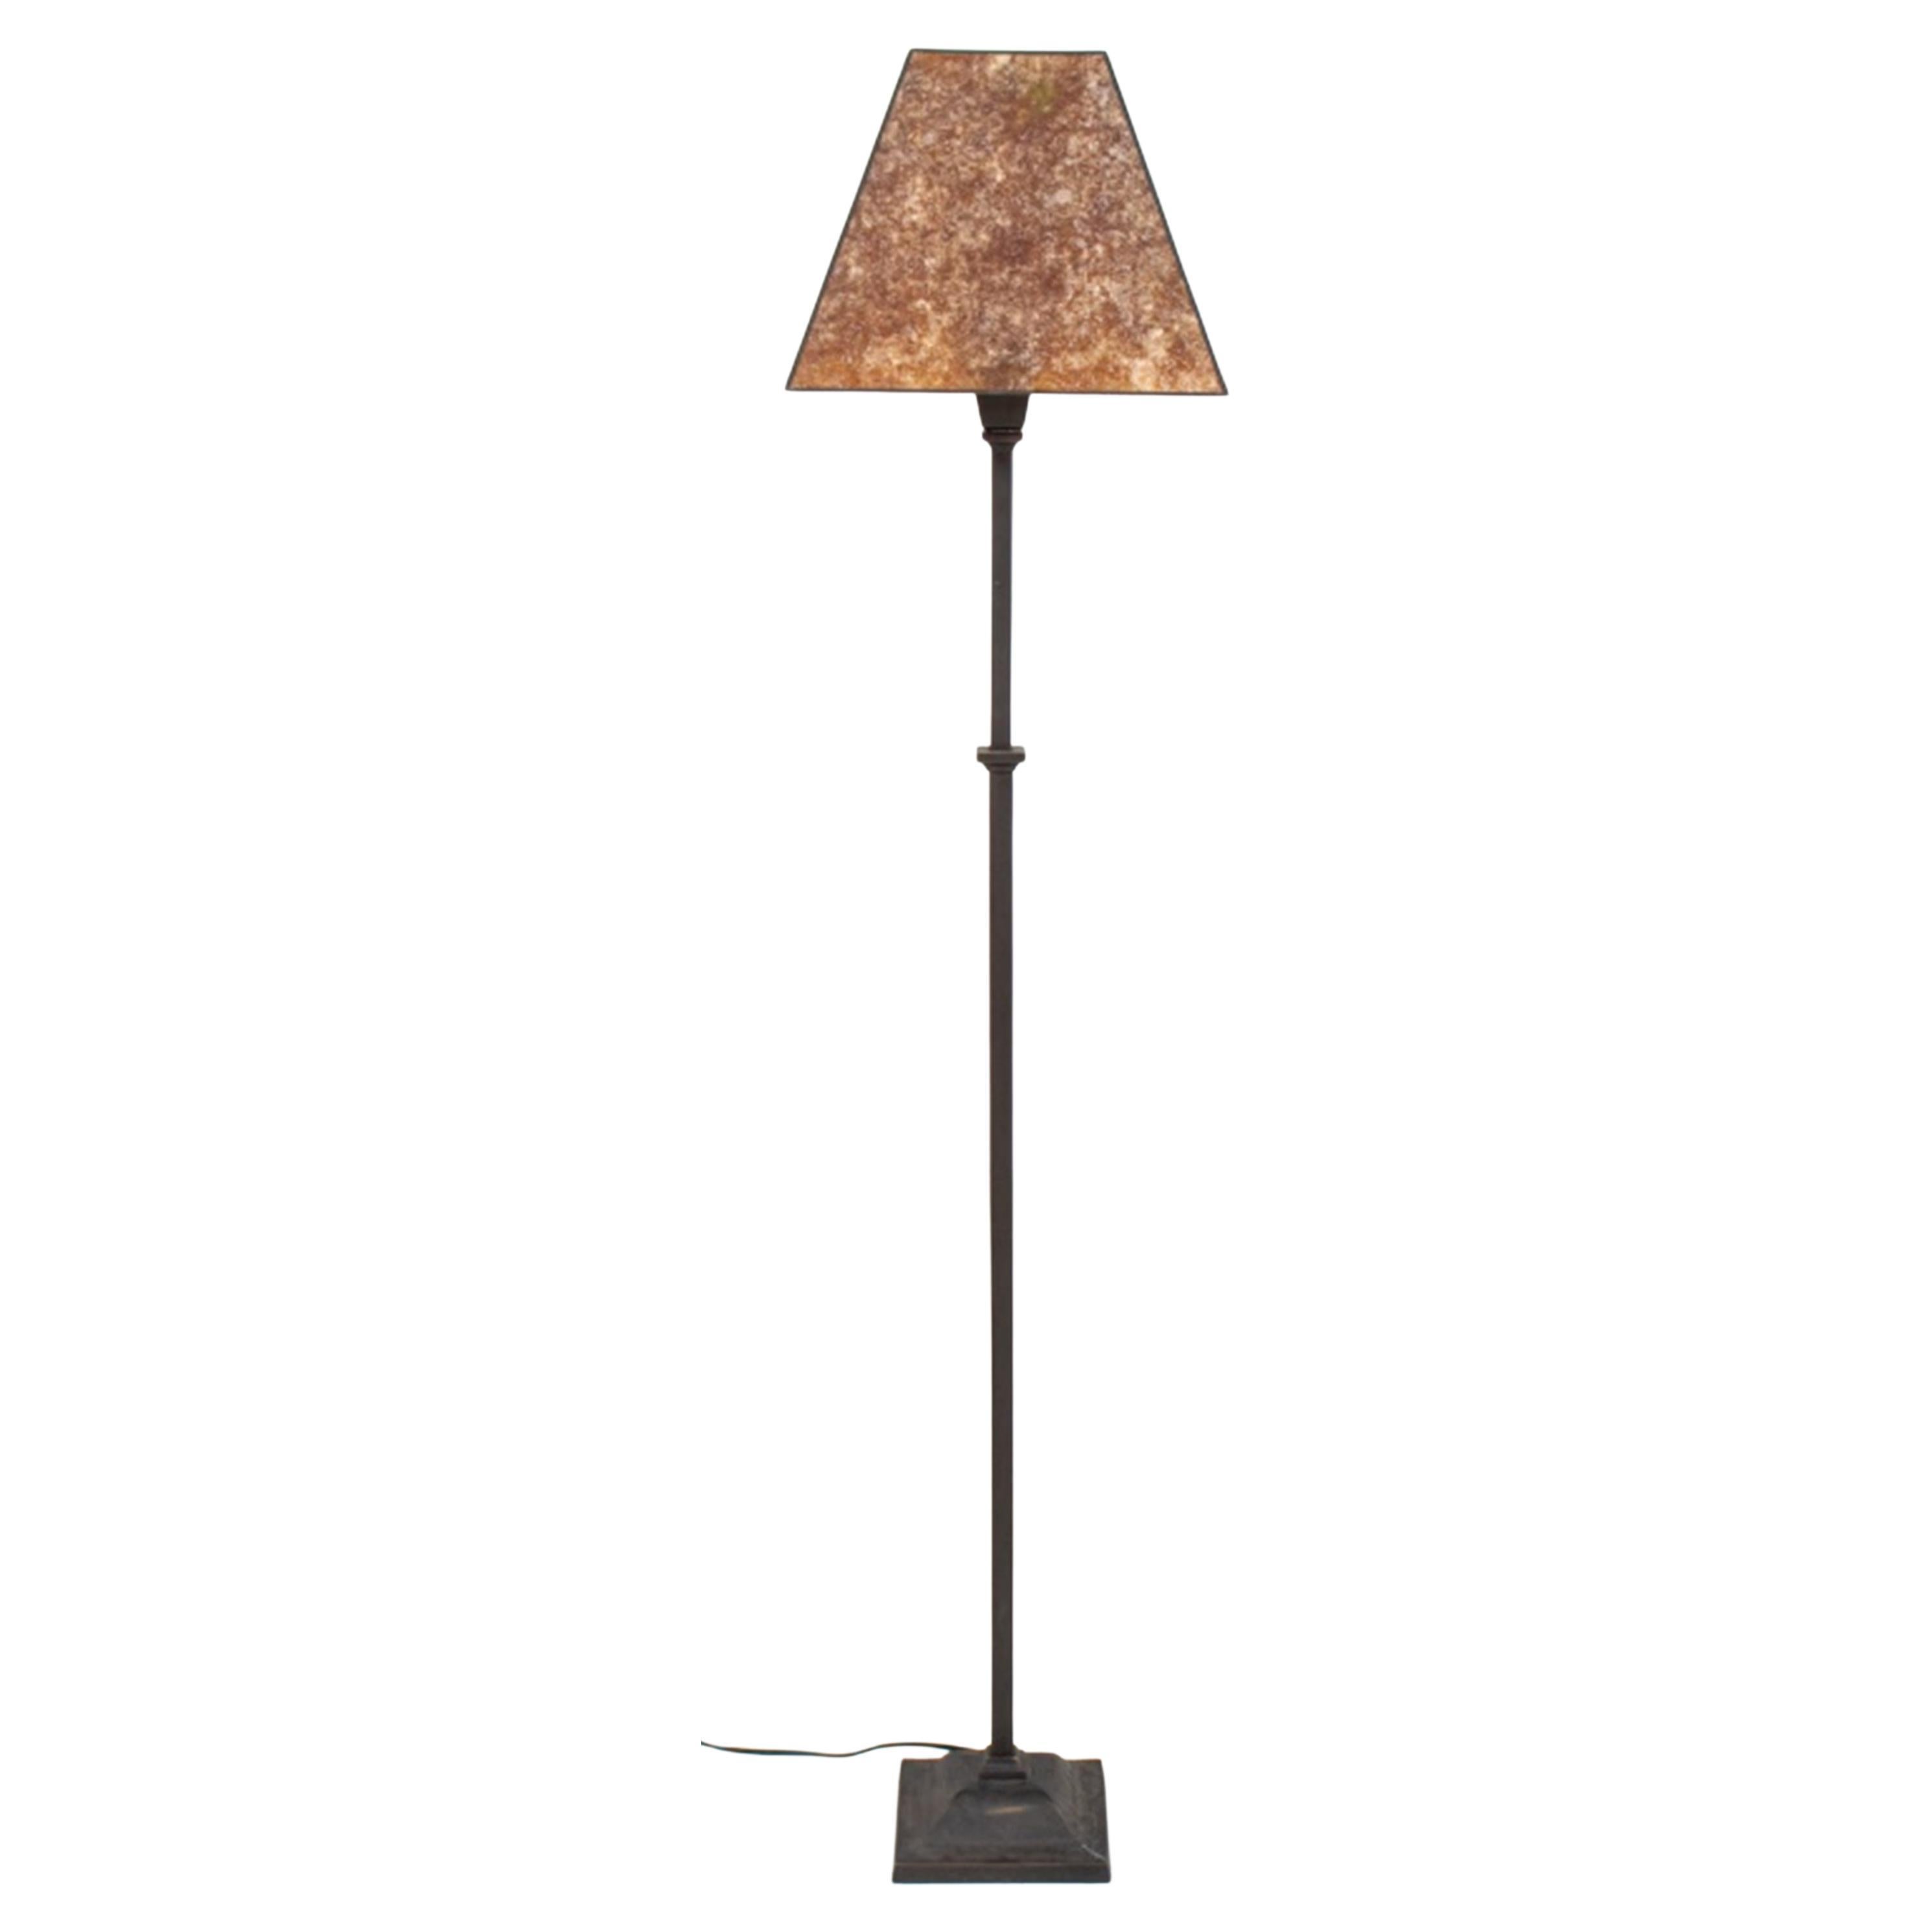 Standing Wrought Iron Floor Lamp with Mica Shade For Sale at 1stDibs